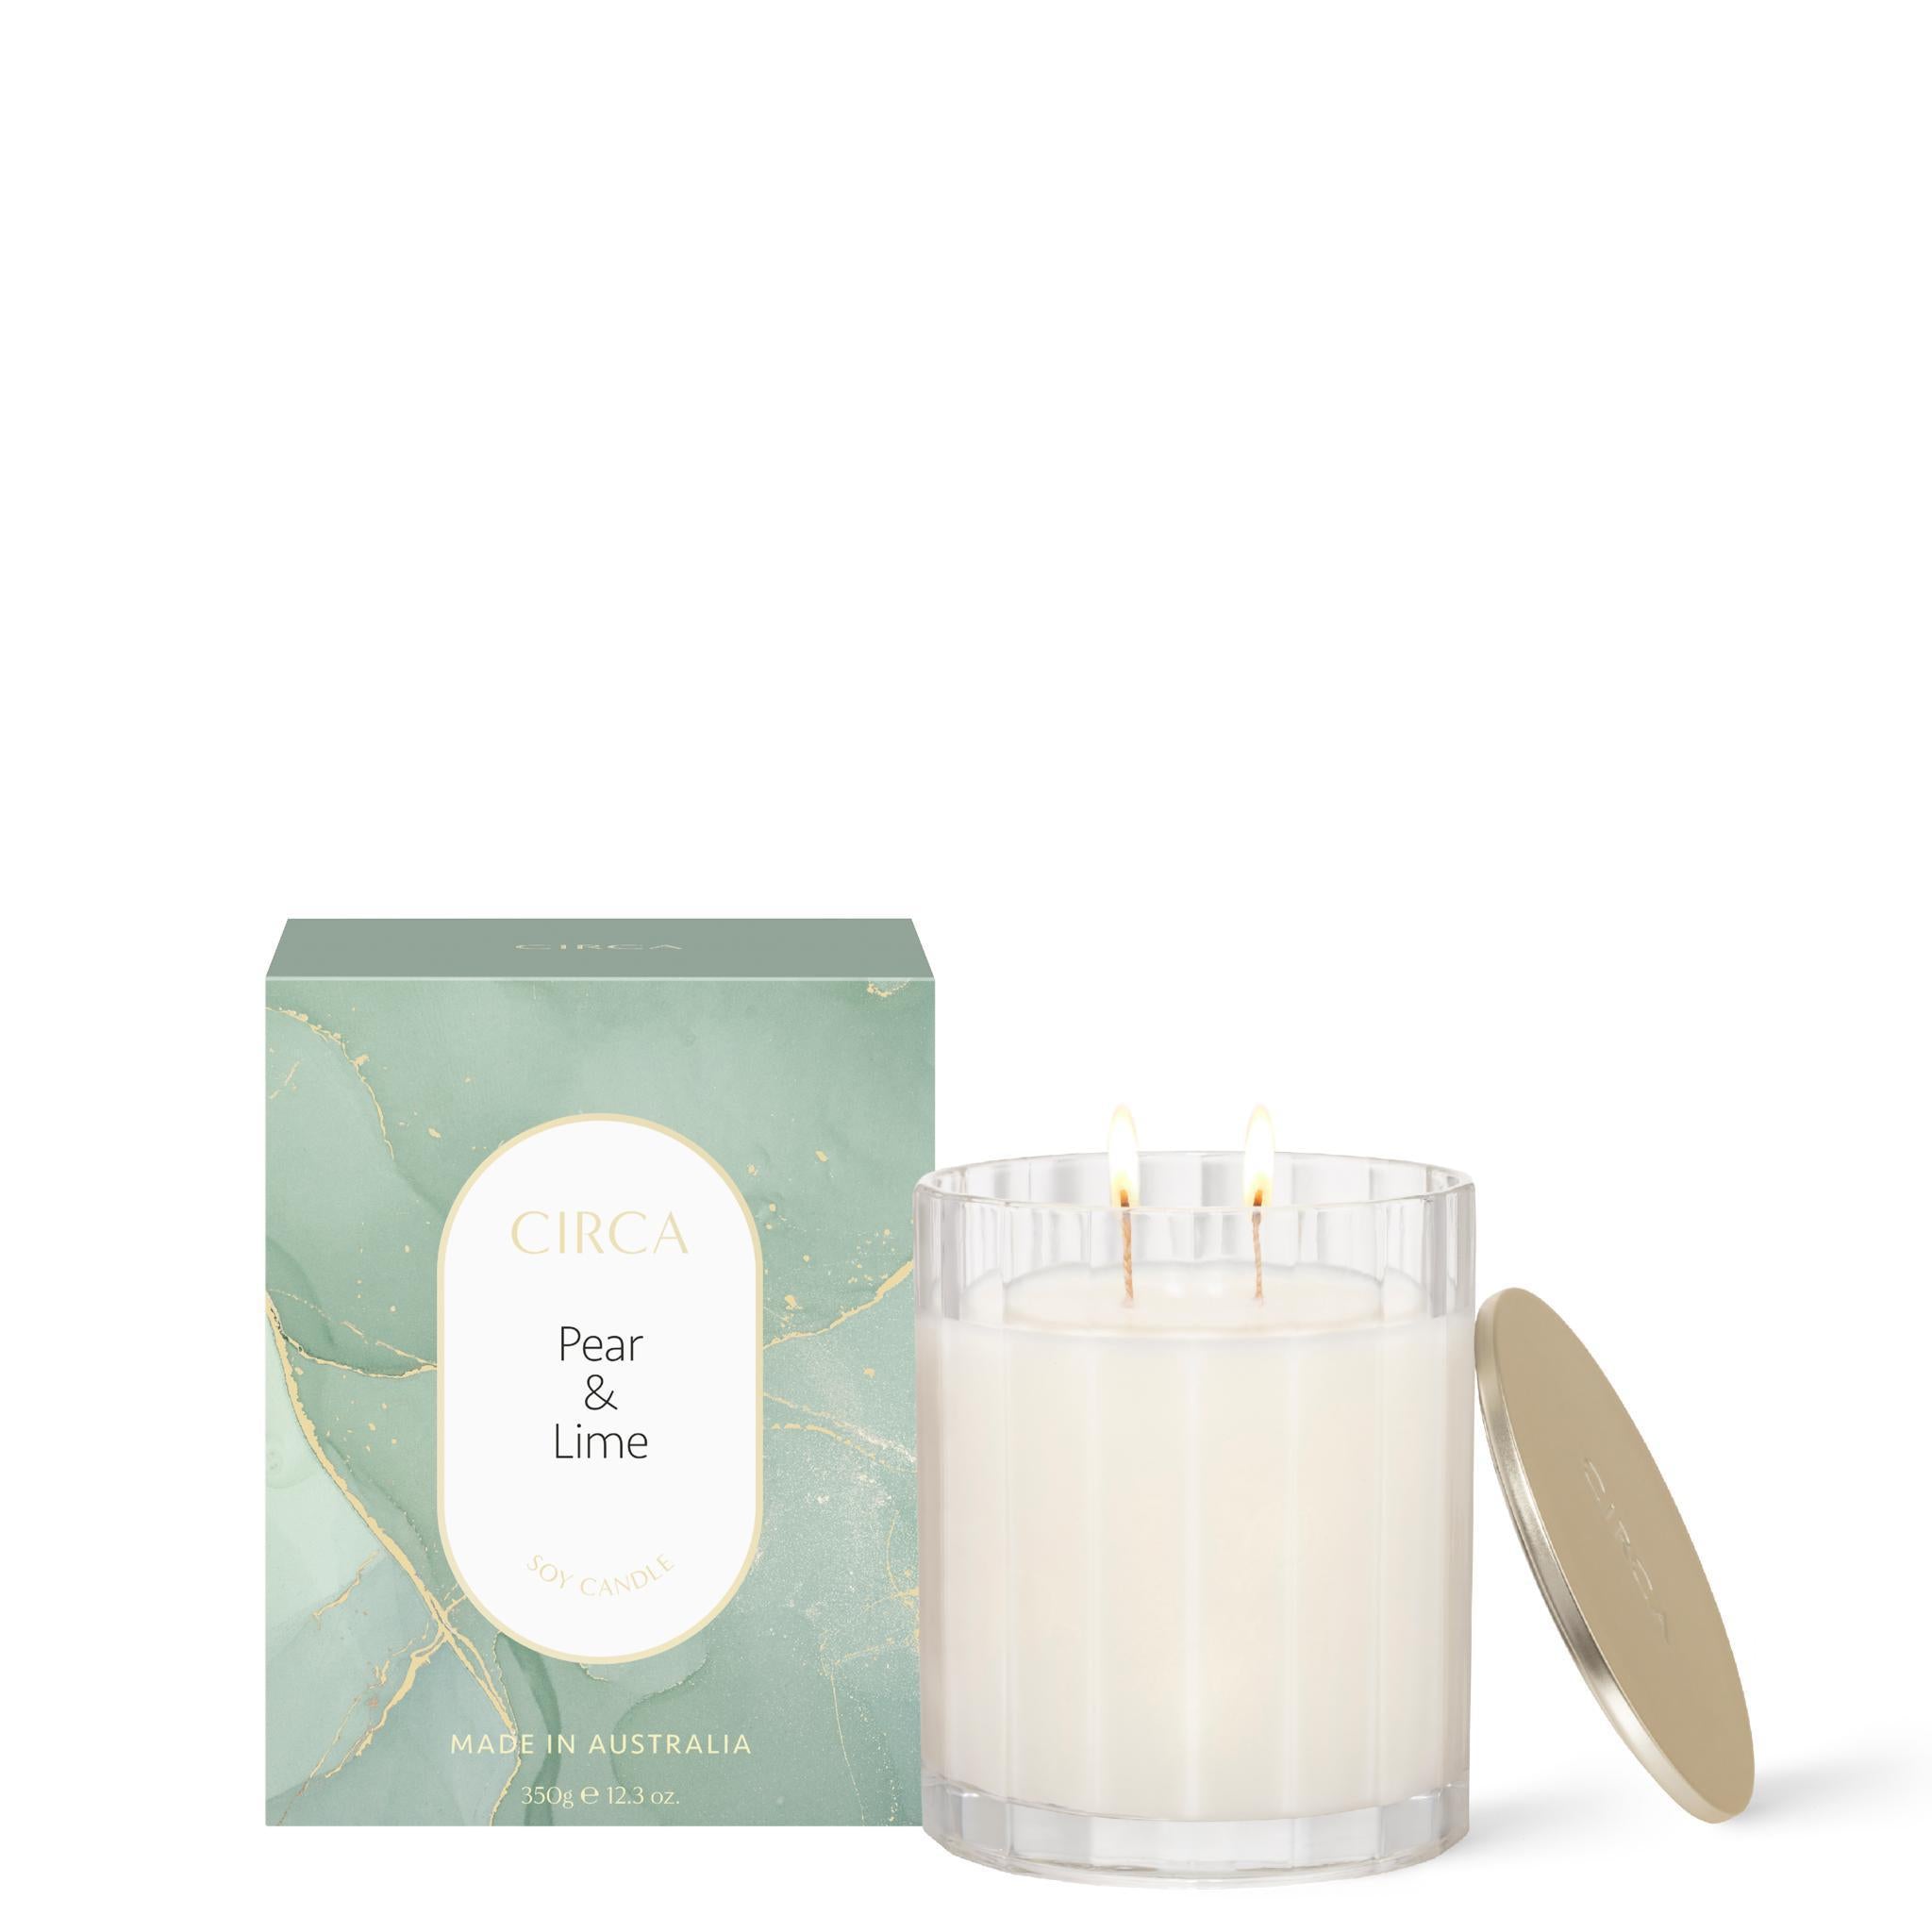 Soy Candle 350g - Asst Fragrance-Candles & Fragrance-Circa-Pear & Lime-The Bay Room